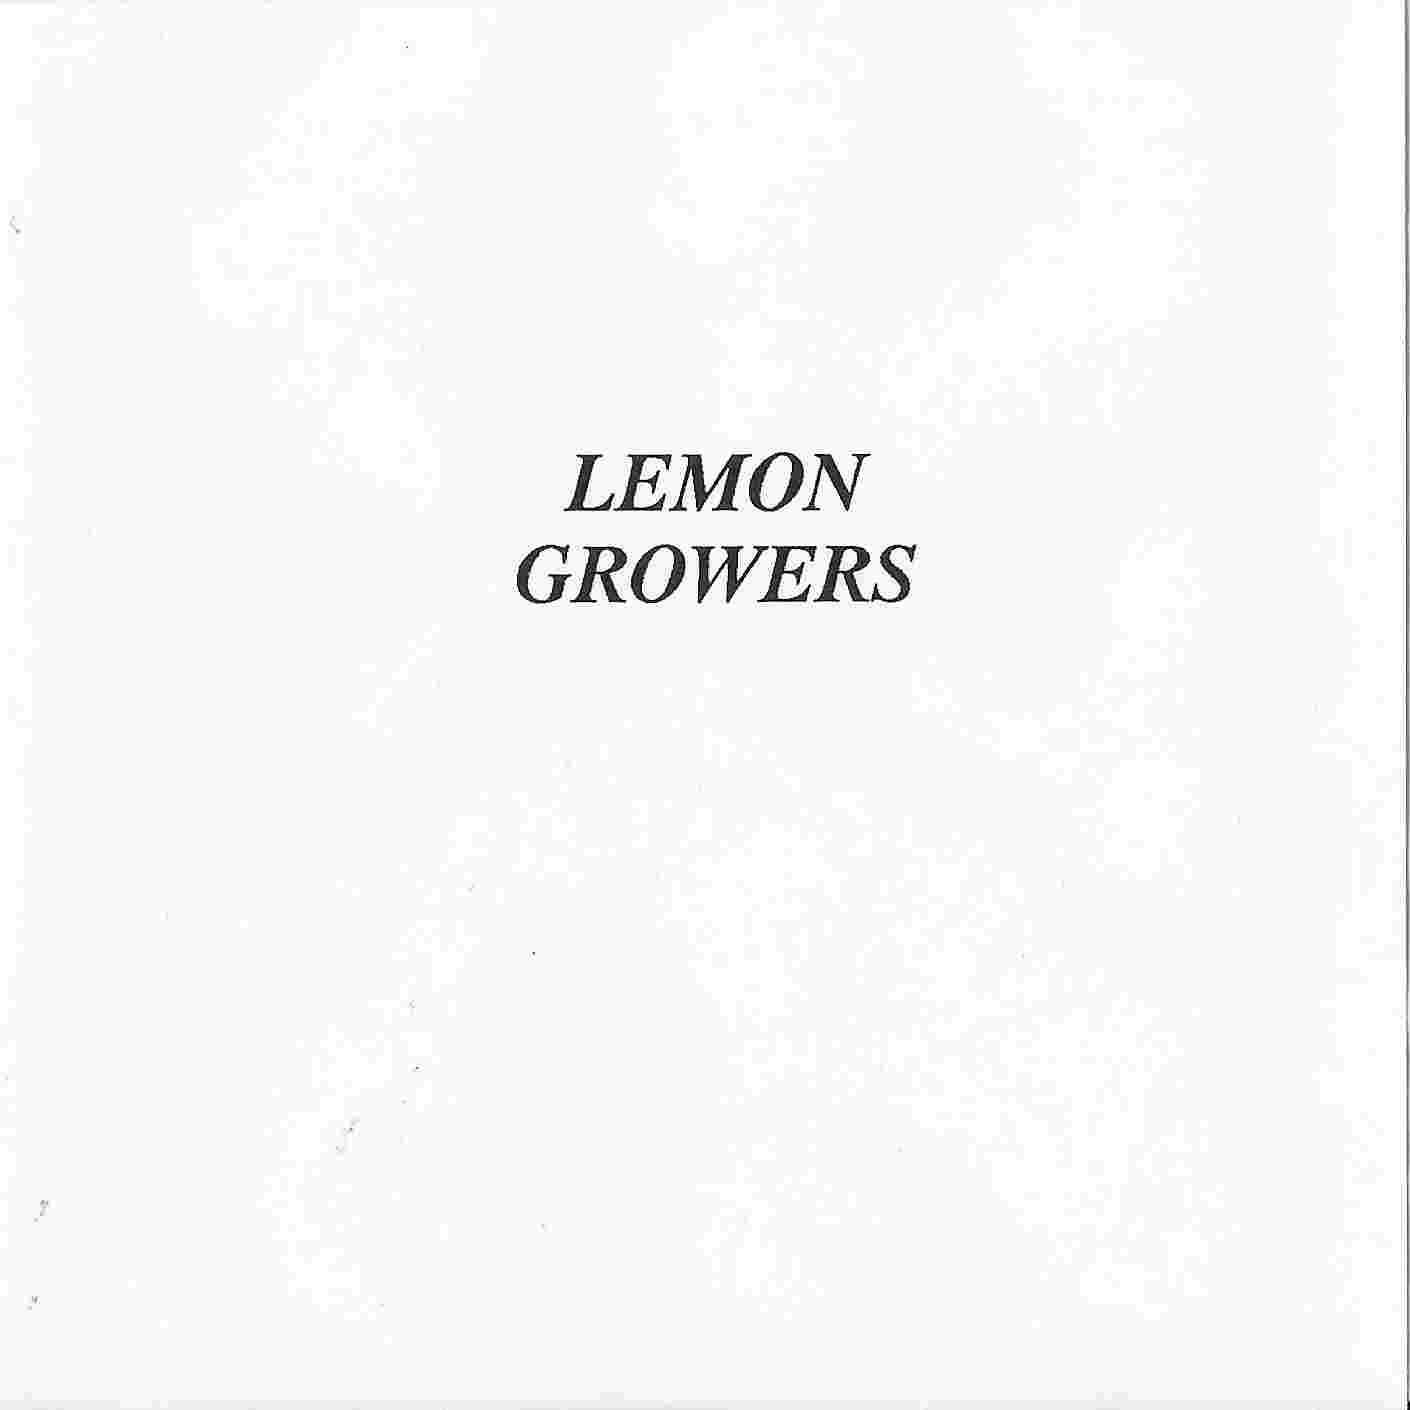 Picture of LGDEM4 The ultimate mutation - Demonstration CD (2 only) by artist The Lemon Growers from The Stranglers cds